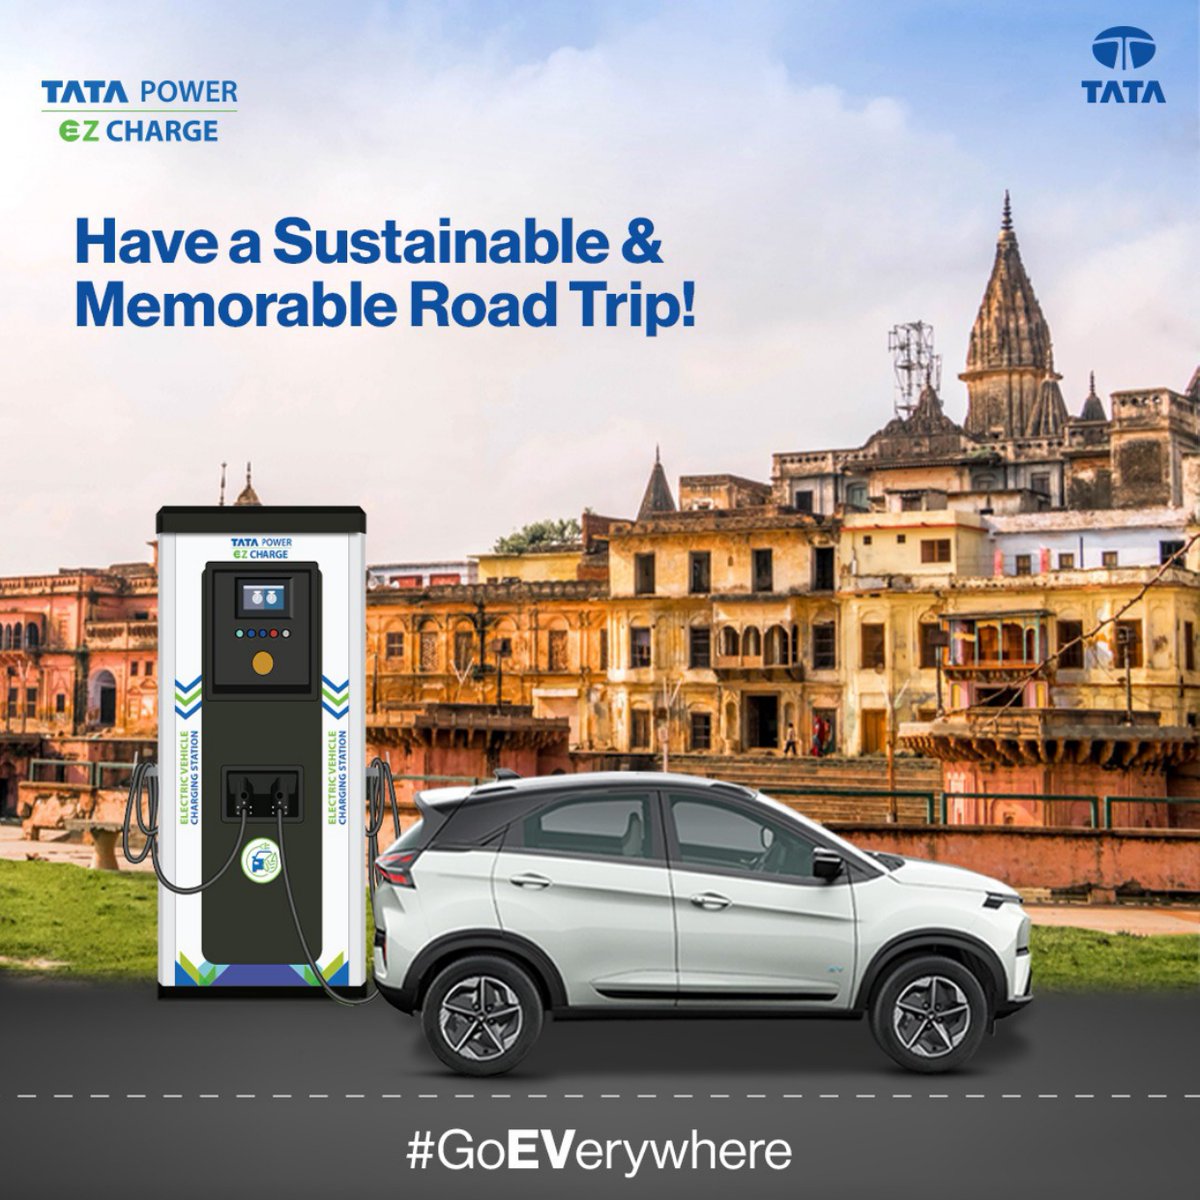 Gearing up for an electric road trip from #Lucknow to #Ayodhya? No need to worry about running low on battery! There's a conveniently located charging station along the highway to keep you powered up, so you can cruise with confidence. Stop stressing about range anxiety and